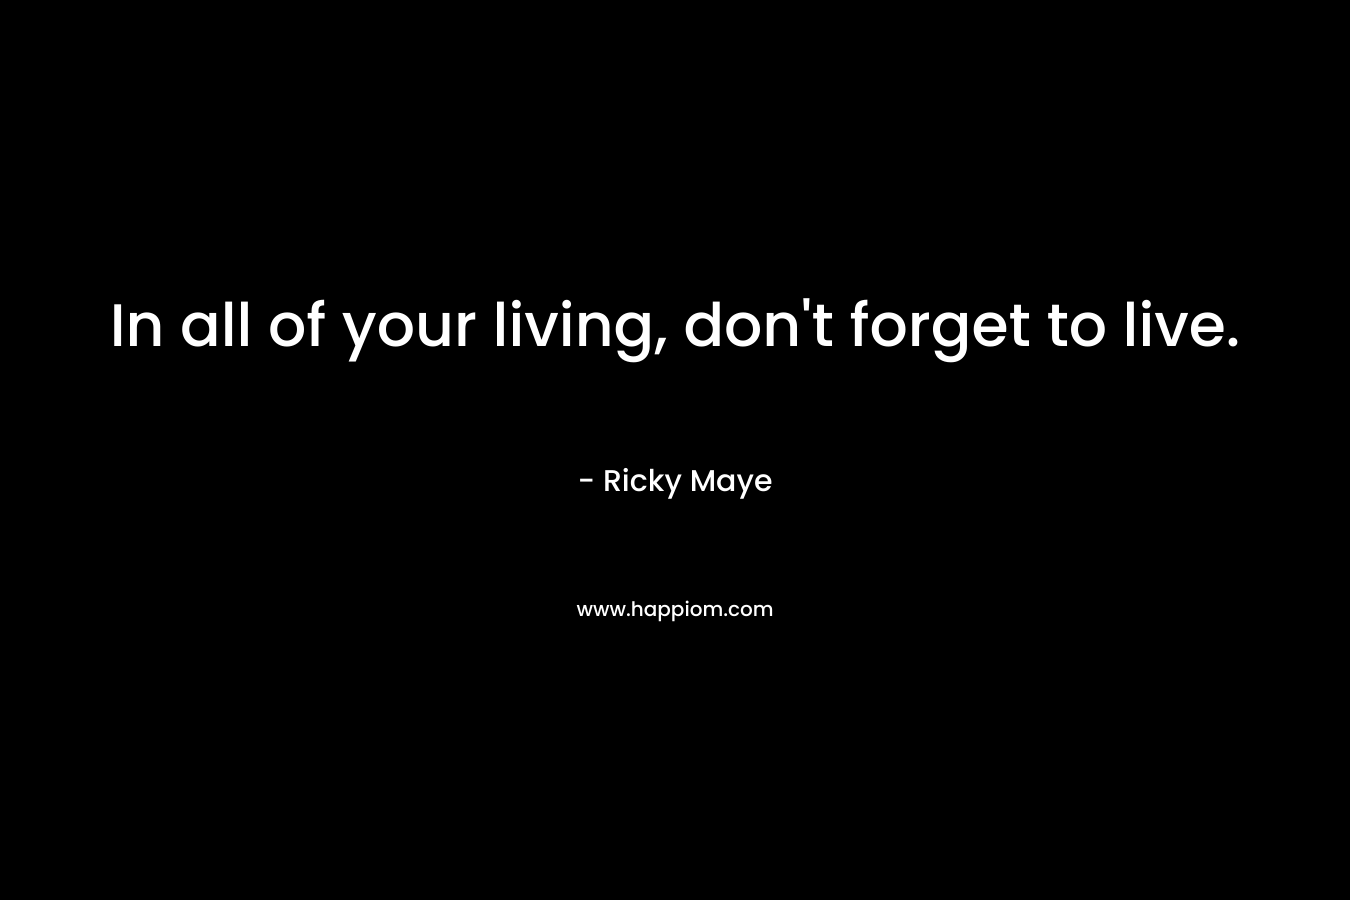 In all of your living, don't forget to live.